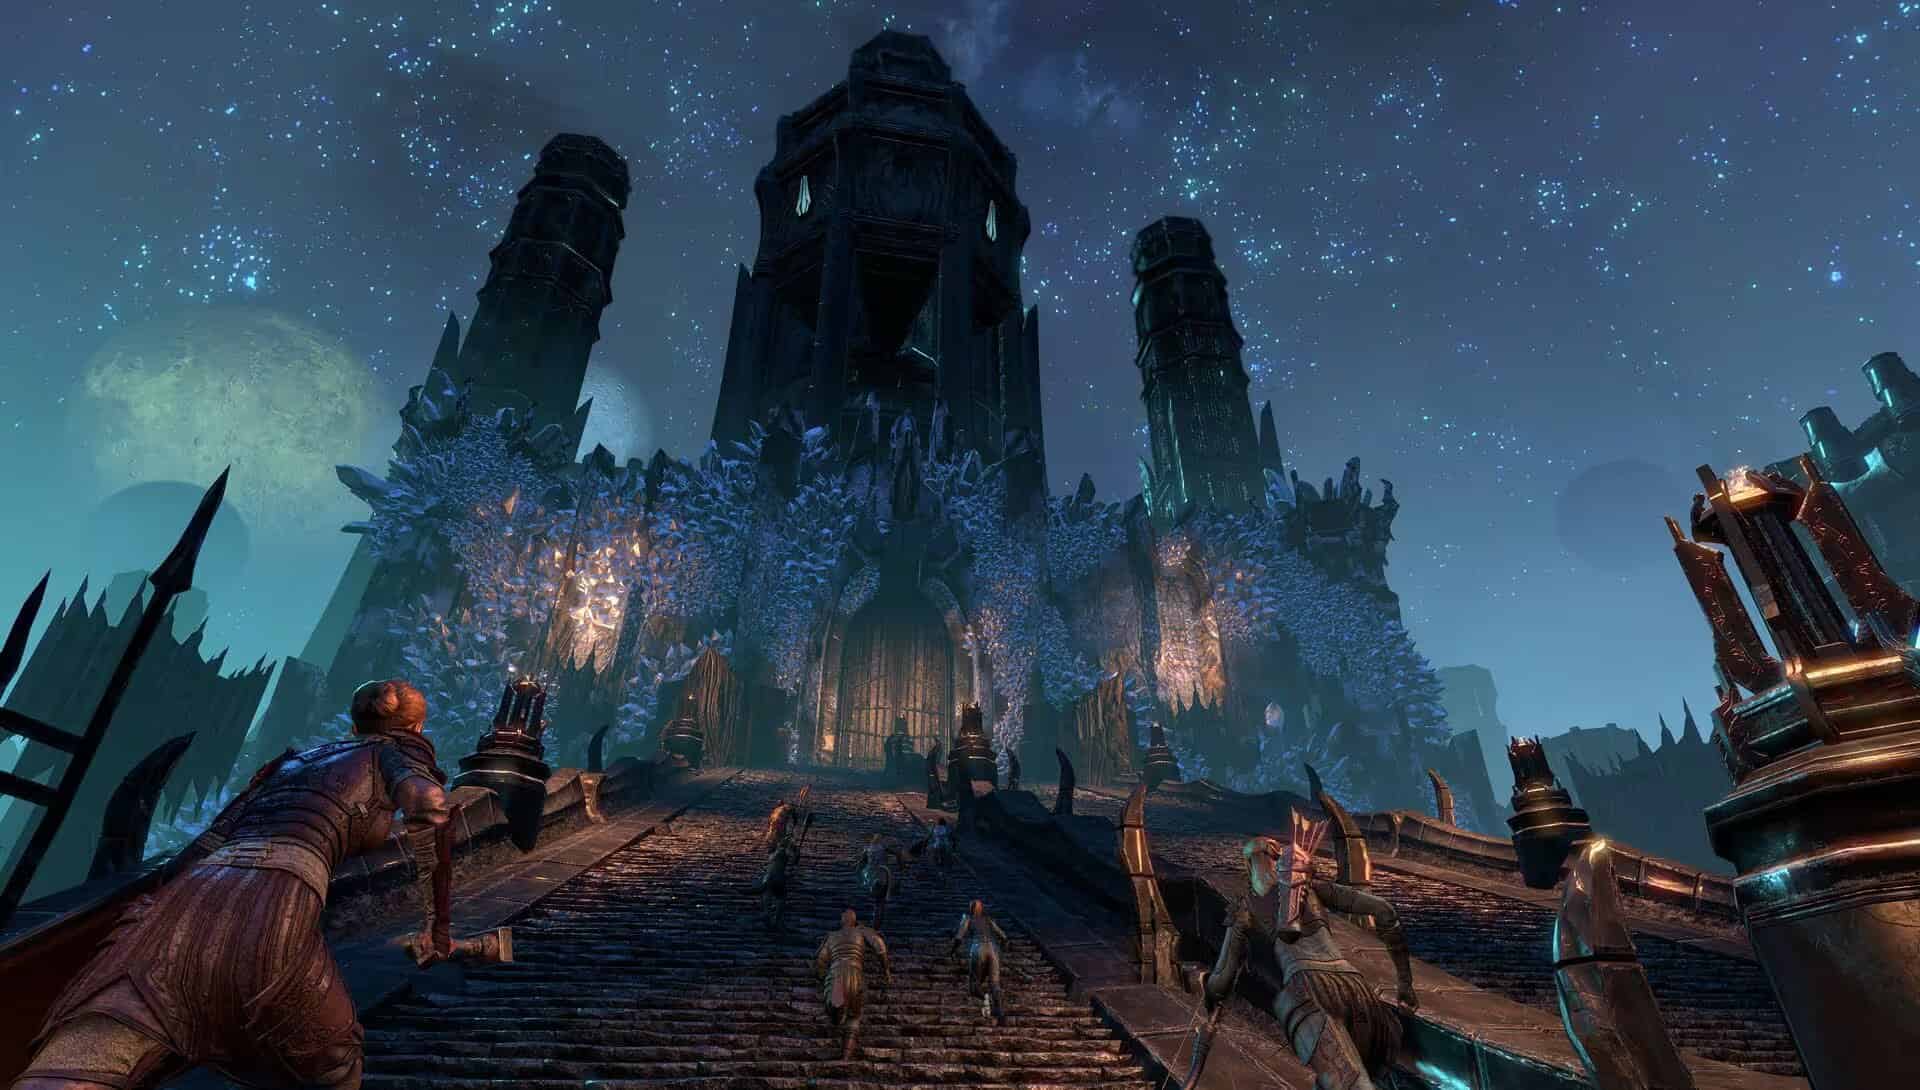 ESO gold road release date - characters approach an imposing building on a large staircase